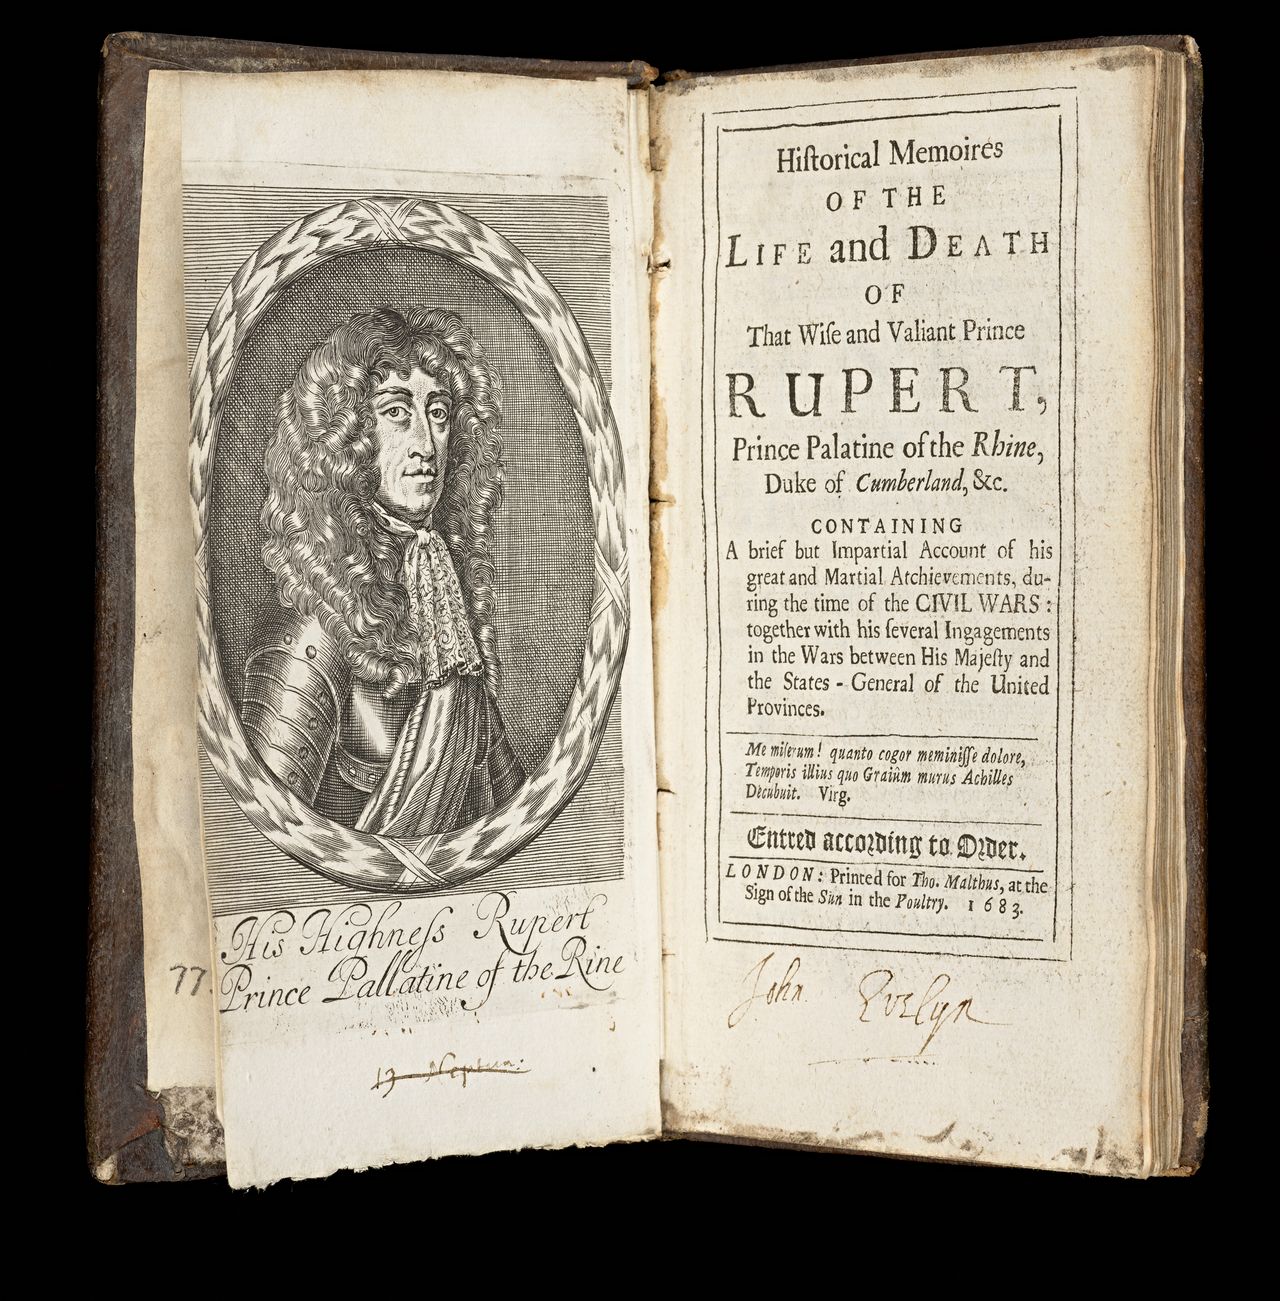 <em>Historical memoires of the life and death of that wise and valiant prince, Rupert, Prince Palatine of the Rhine, Duke of Cumberland...</em>, London, printed for Tho[mas] Malthus, at the sign of the Sun in the Poultry, 1683, State Library Victoria, Melbourne (RAREEMM 116/18)